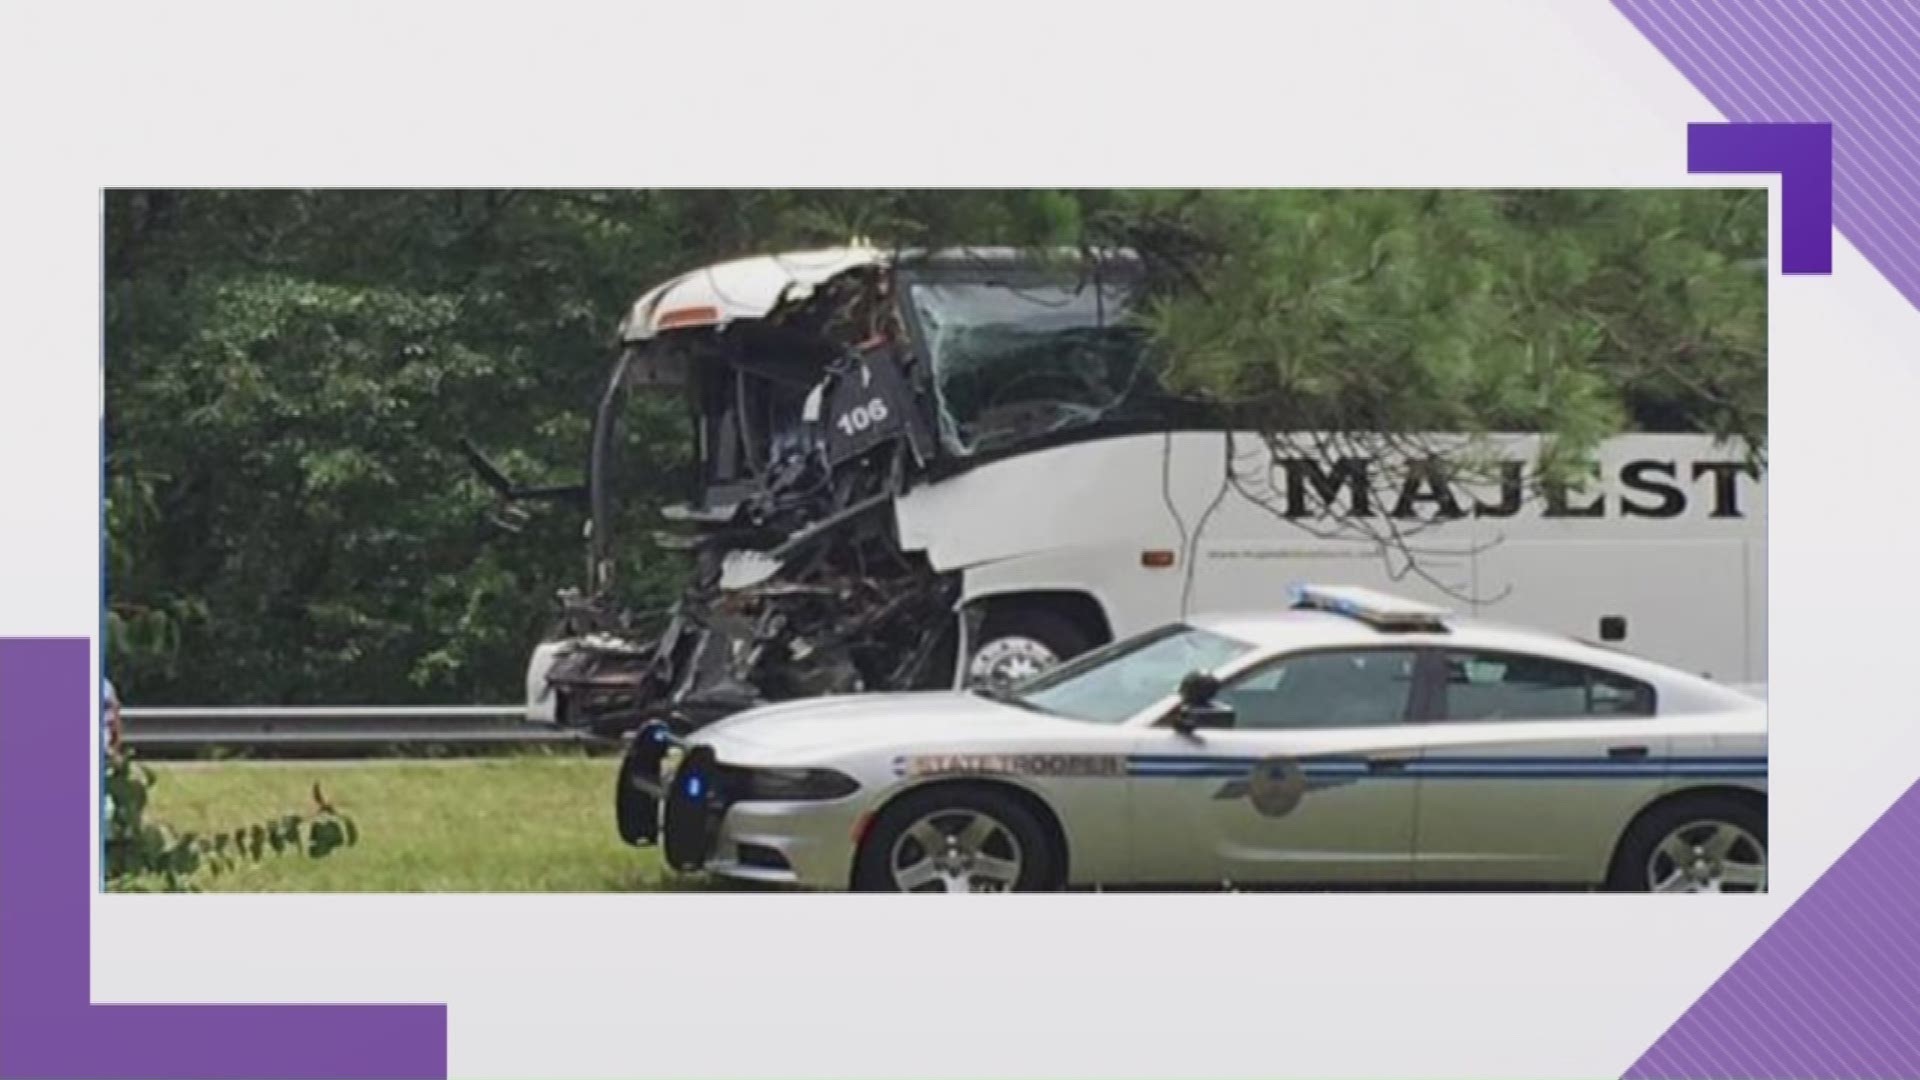 A Rock Hill tour bus crashed into a semi hauling a tank in Aiken county today, killing the driver of the tour bus, 